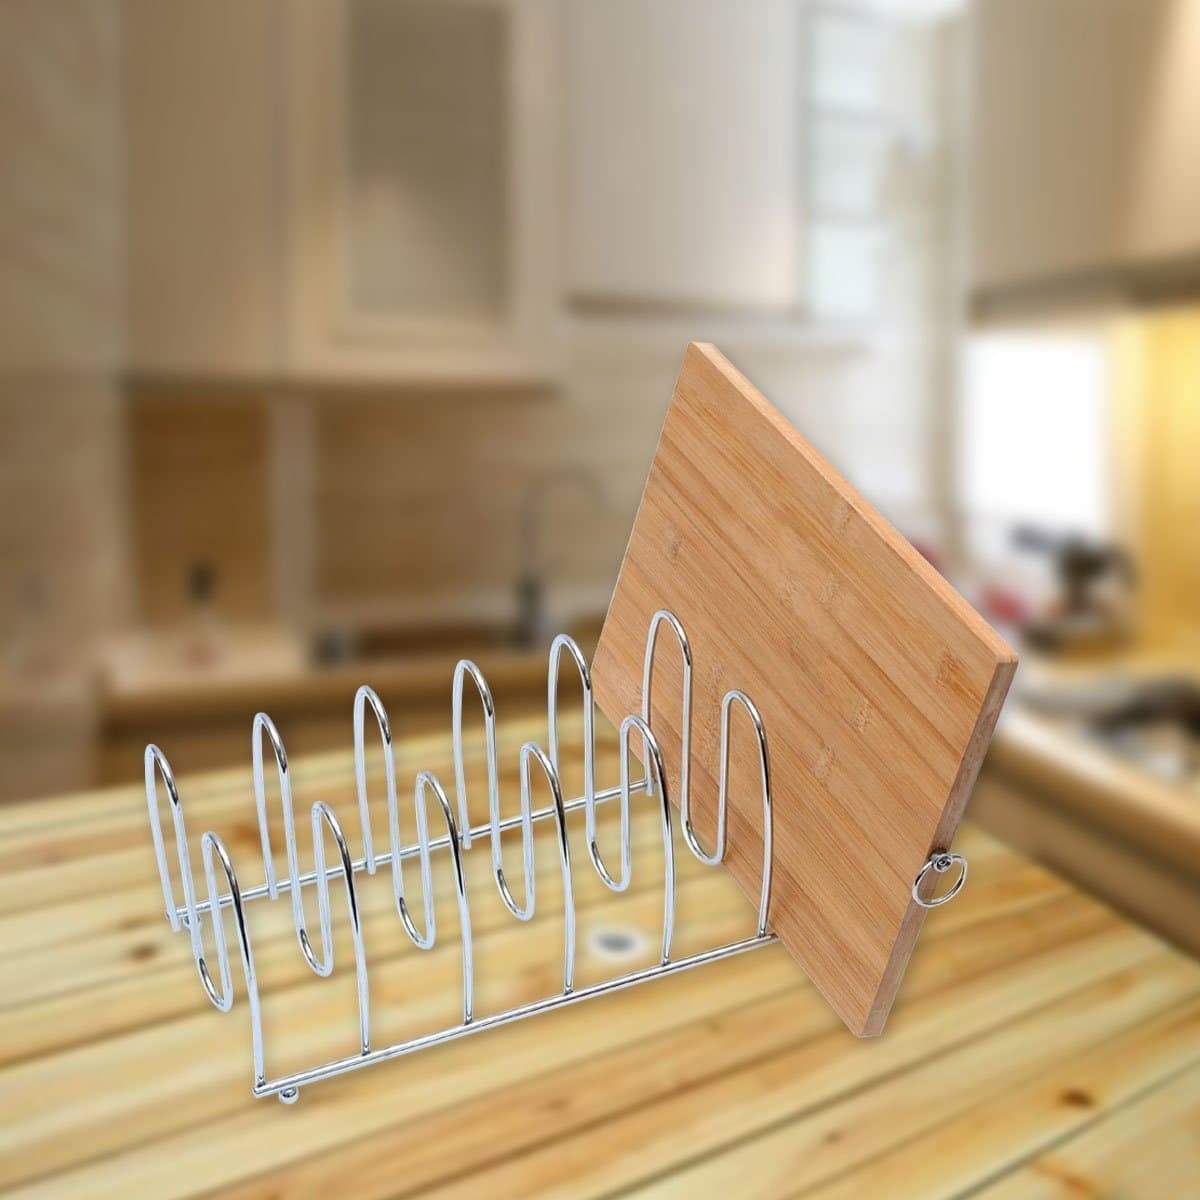 Products cutting board holder rack pot lid organizer for kitchen cabinet countertop large 6 block chrome steel 13 2l x 5 5h x 5 5w